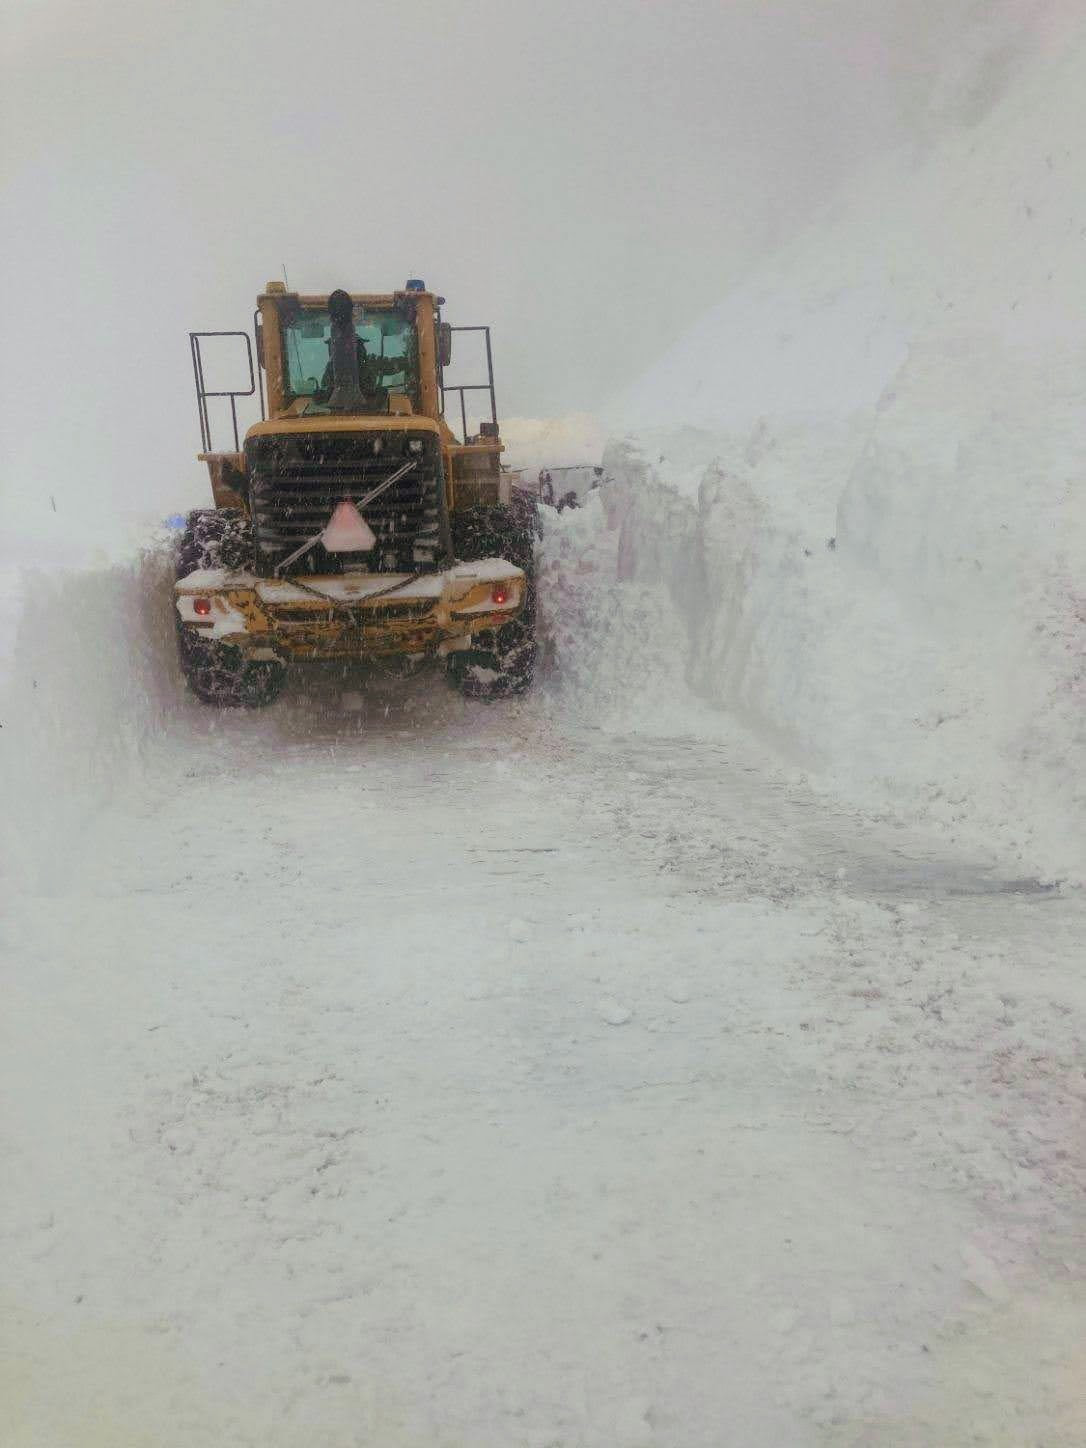 CDOT maintenance crews tackled large slide paths on the west side of US 160 Wolf Creek Pass.jpg detail image